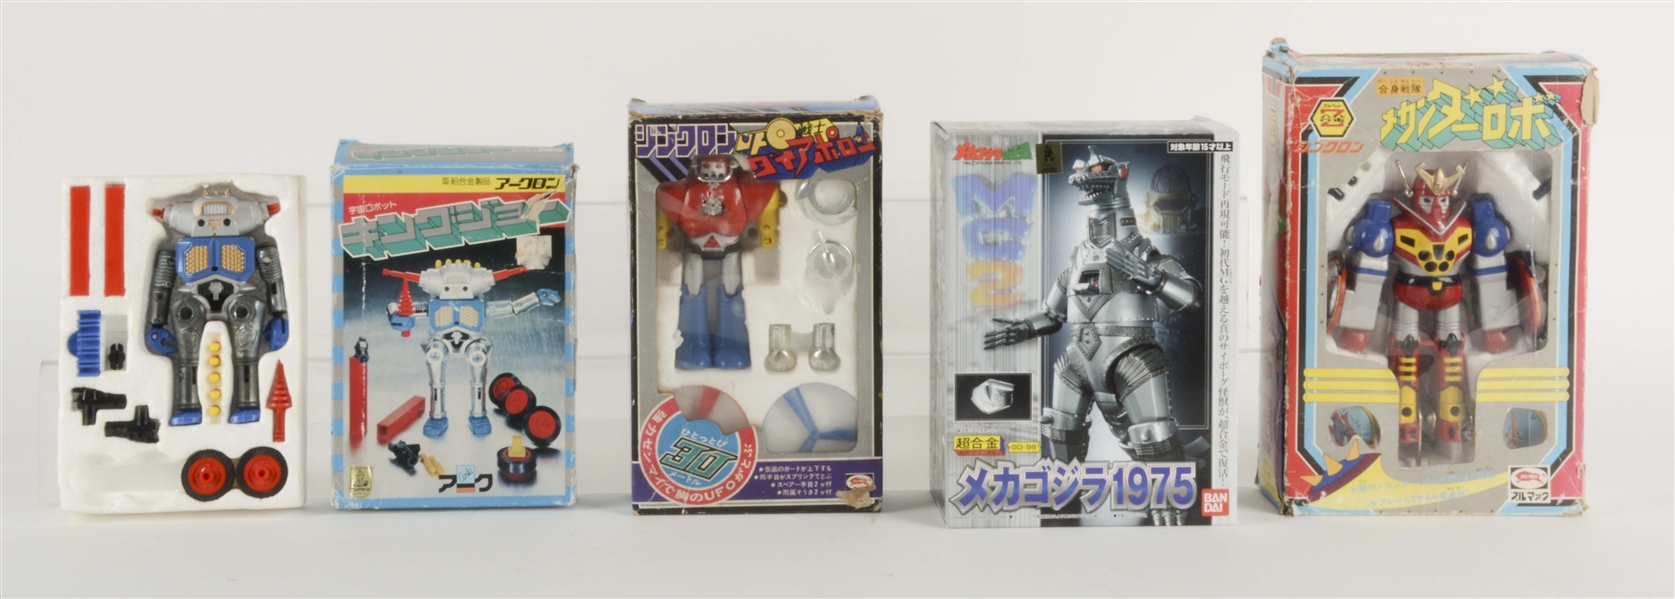 LOT OF 4: JAPANESE DIE-CAST CHARACTER FIGURES & MONSTERS IN BOXES. 